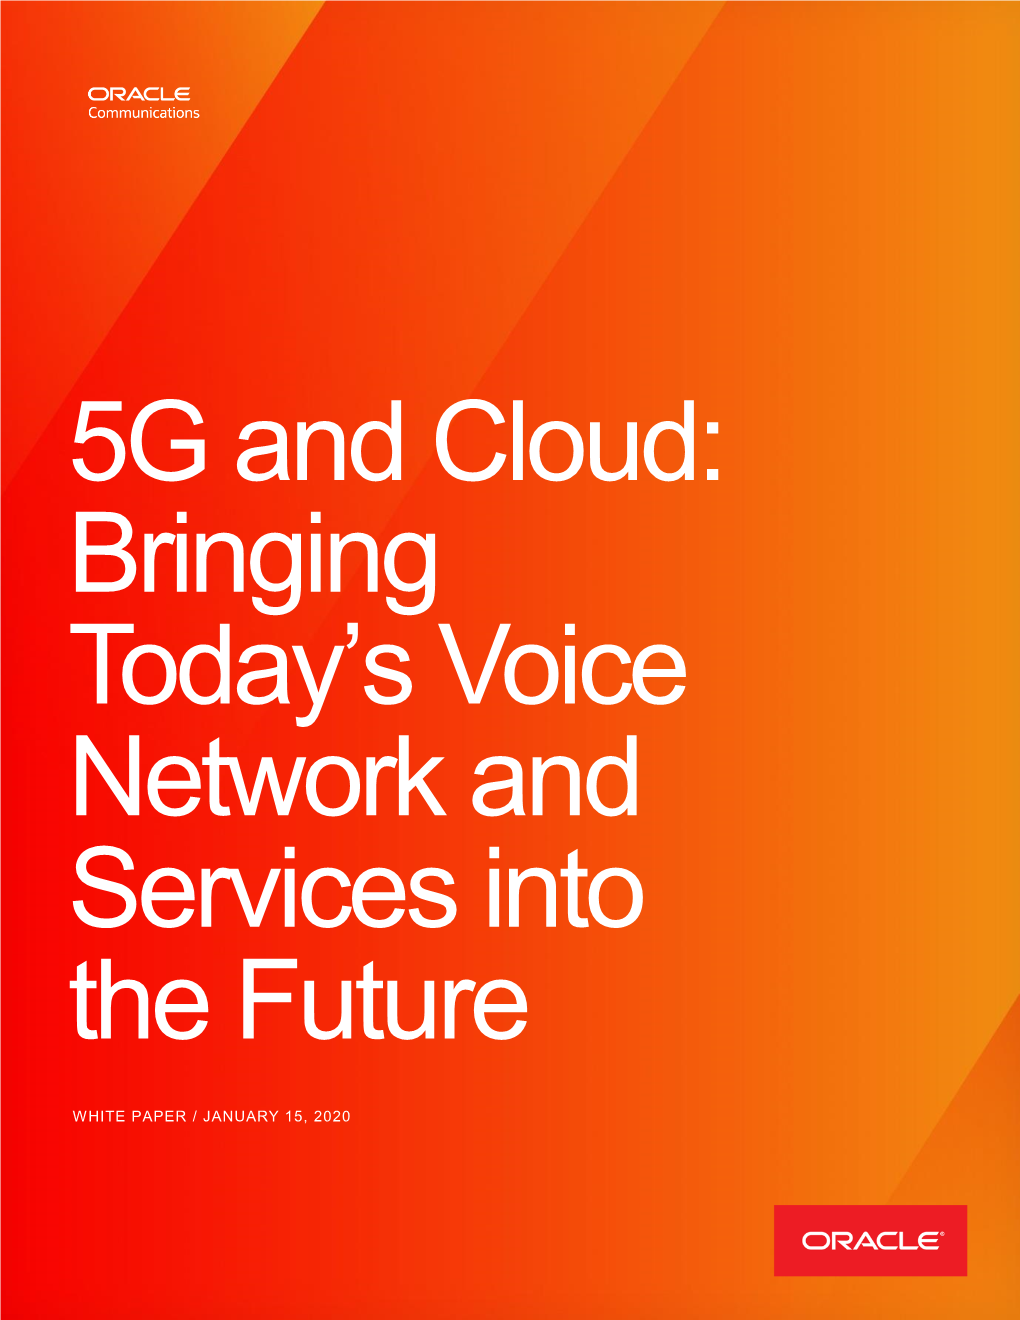 5G and Cloud Bringing Voice Into the Future (PDF)